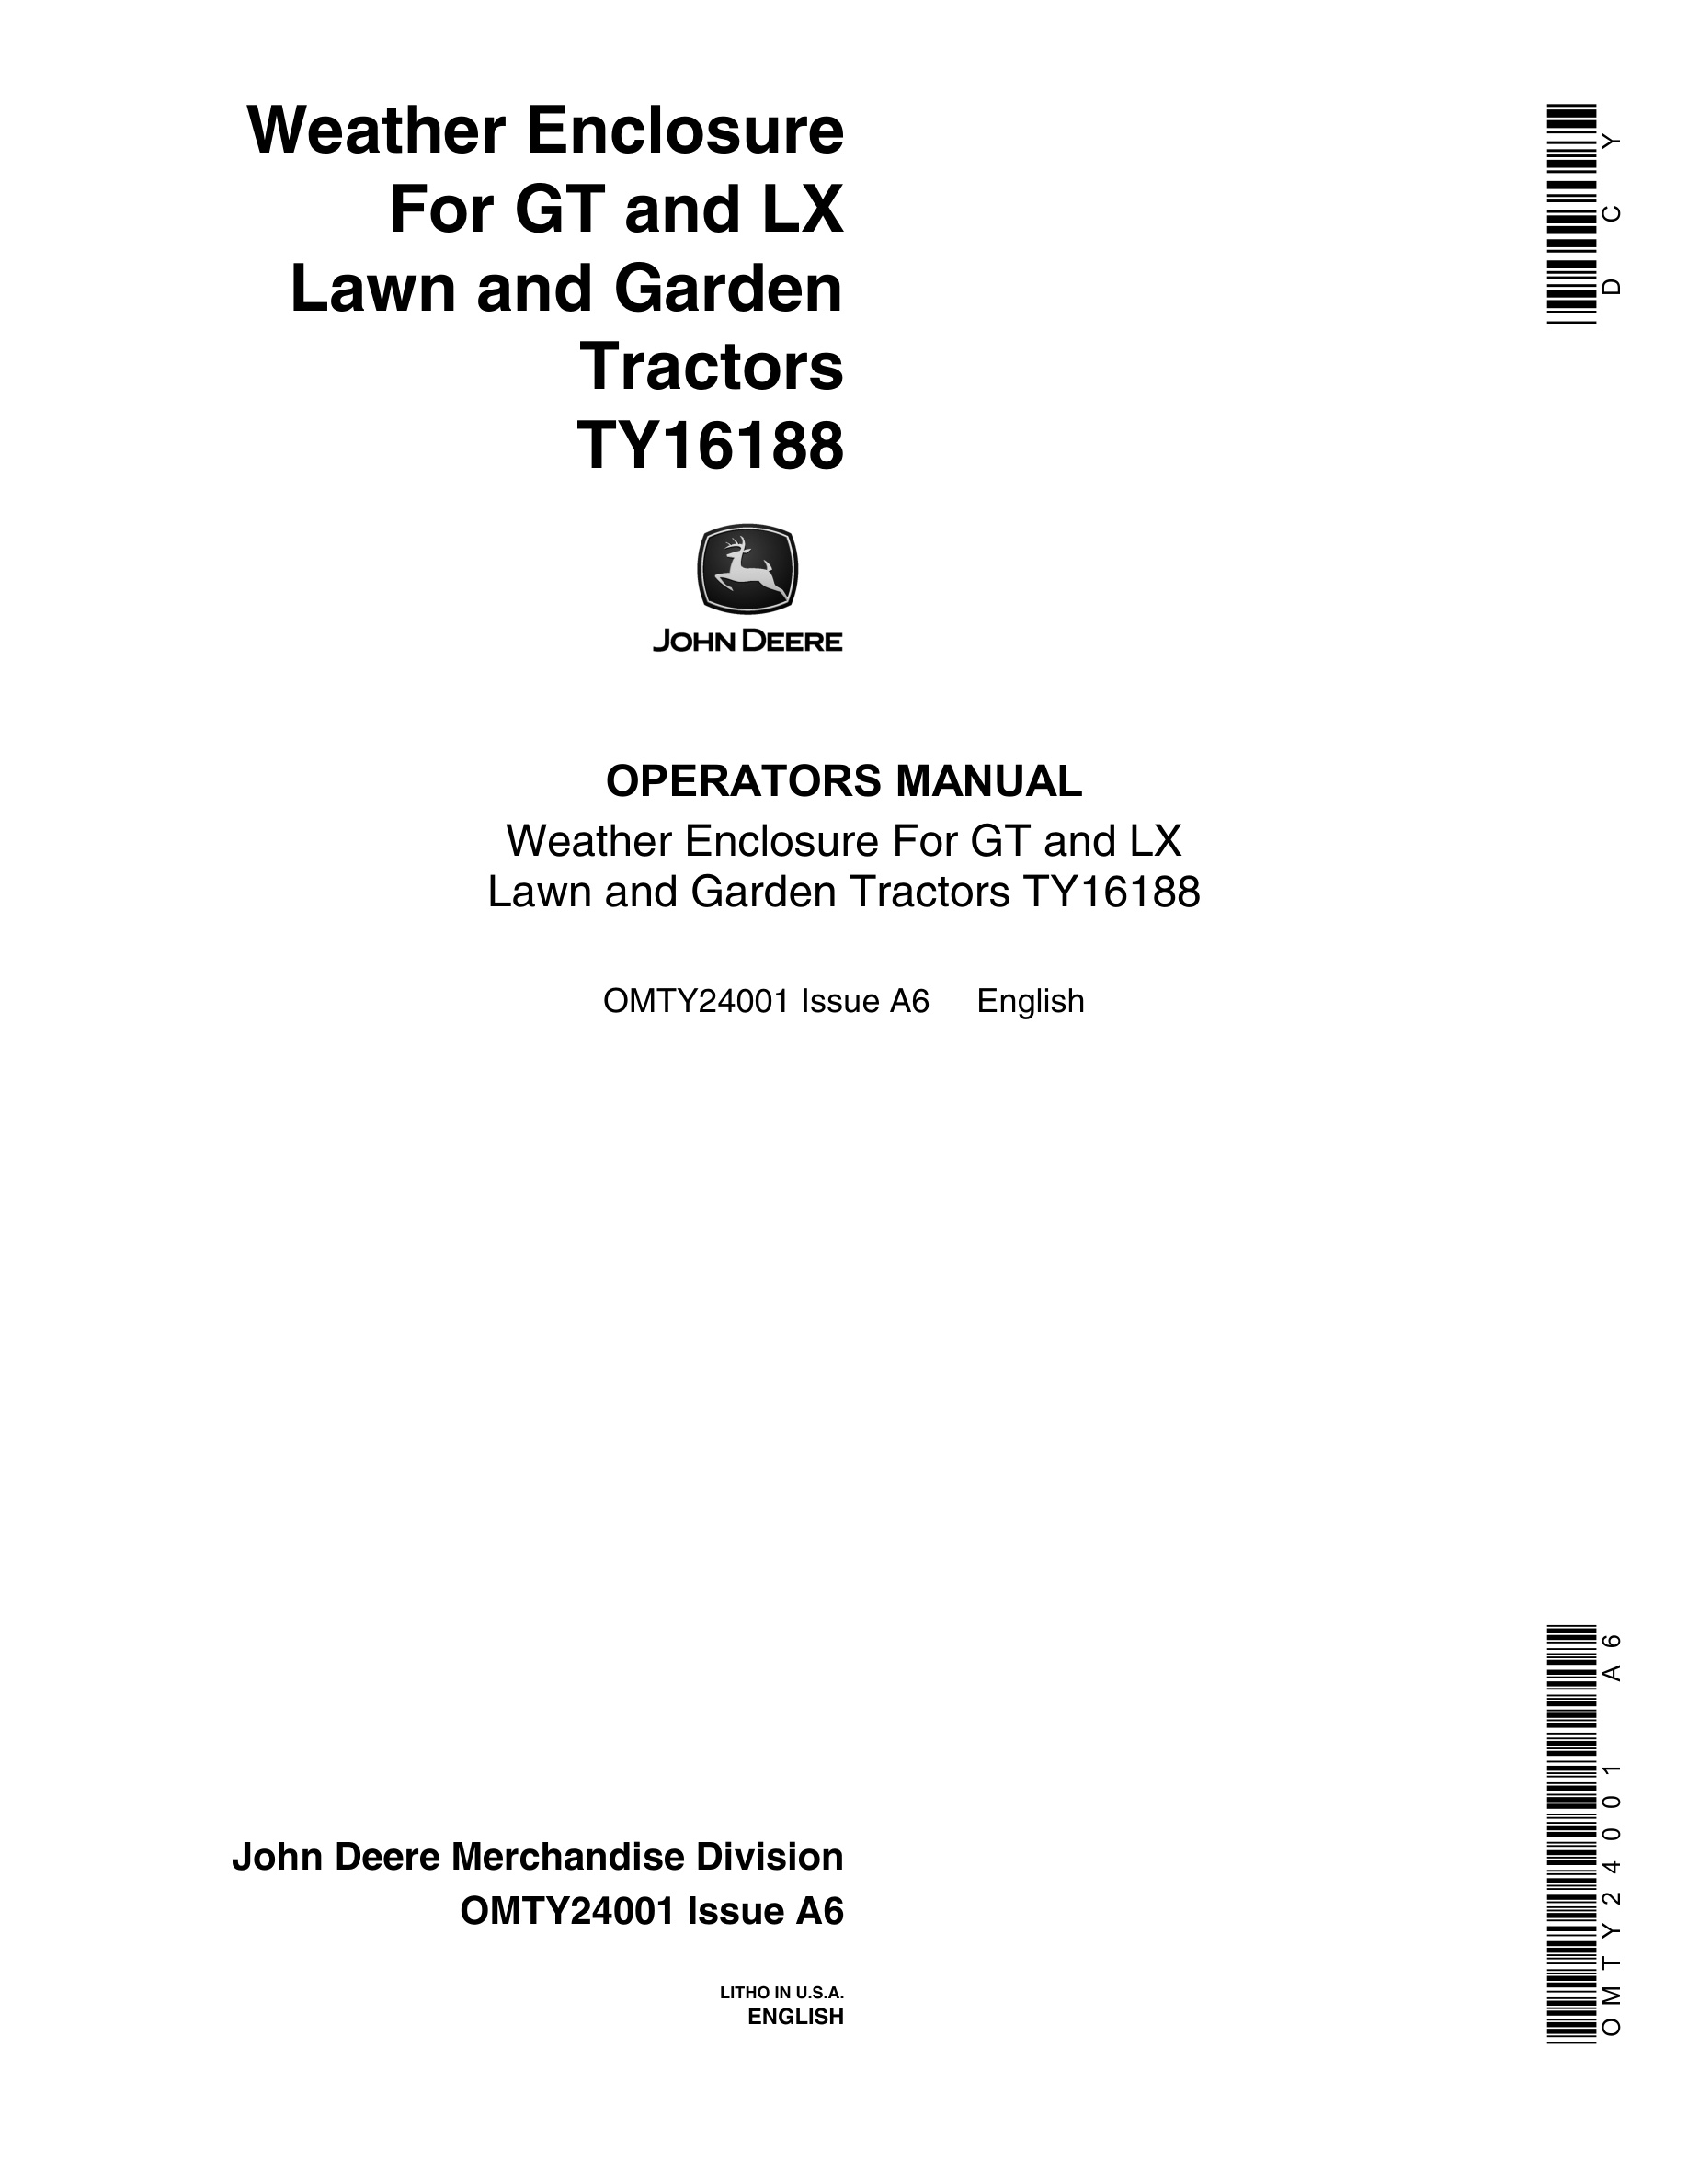 John Deere Weather Enclosure For Gt And Lx Lawn And Garden Tractors Operator Manuals OMTY24001-1